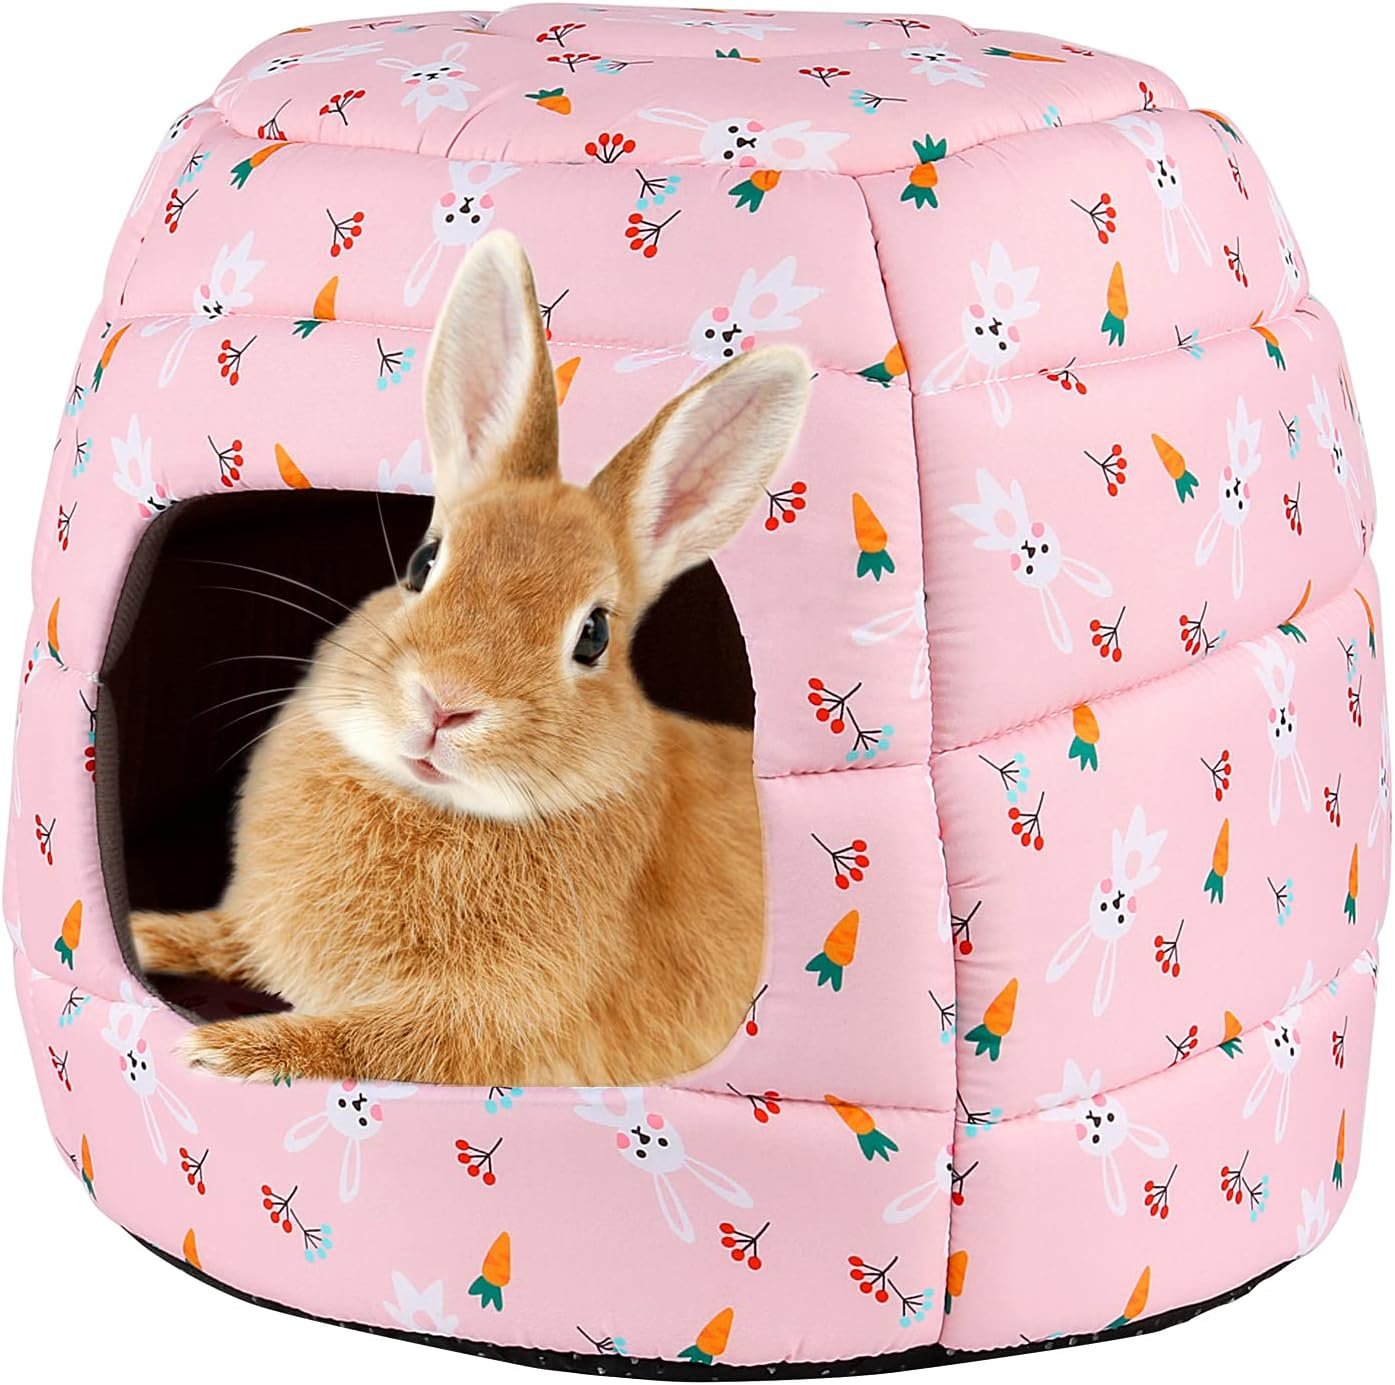 YUEPET Large Rabbit Bed House Foldable Winter Warm Bunny Hideout Cave for Guinea Pig Hamster Squirrel Ferret Hedgehog Chinchilla Cozy Cage Accessories